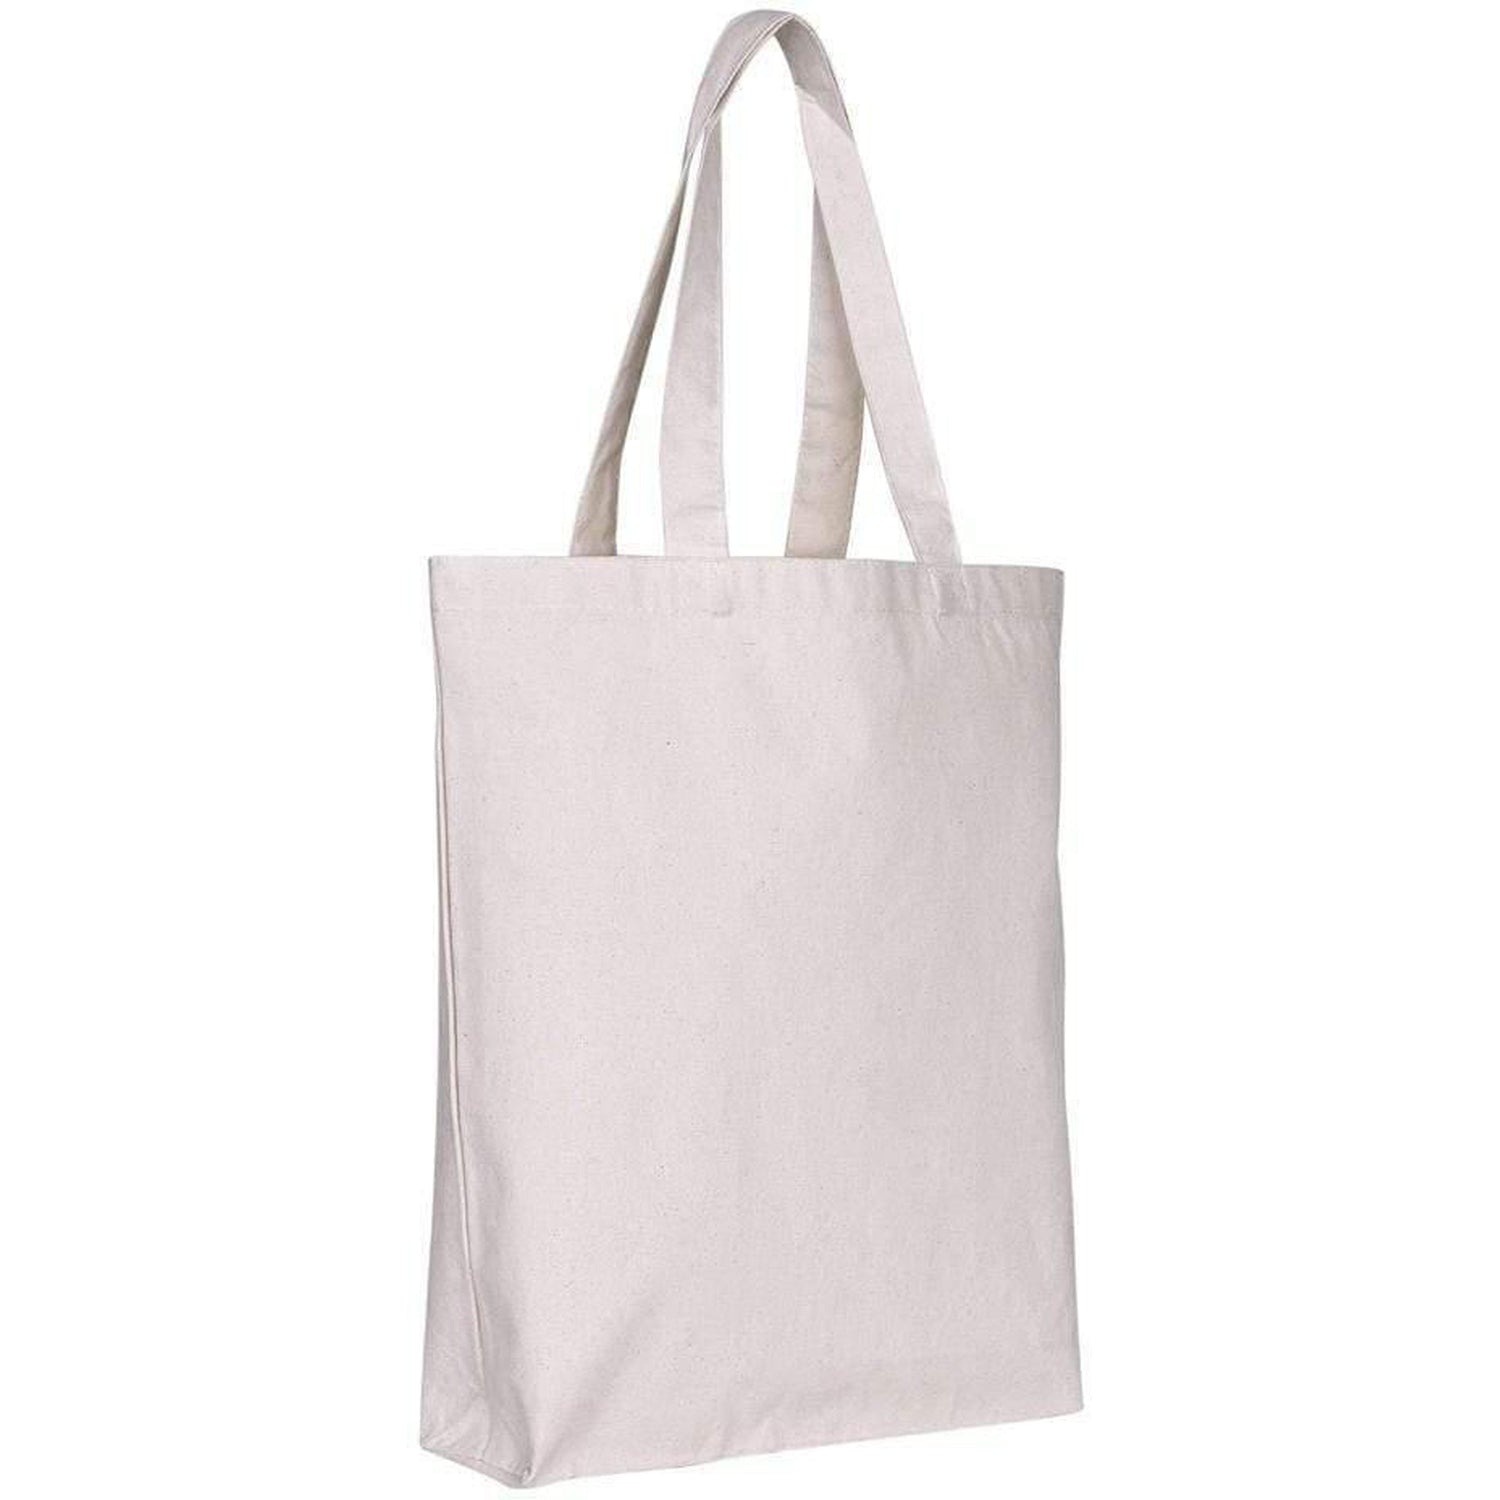 Heavy Weight Wholesale Canvas Tote Bags with Bottom Gusset – BagzDepot™